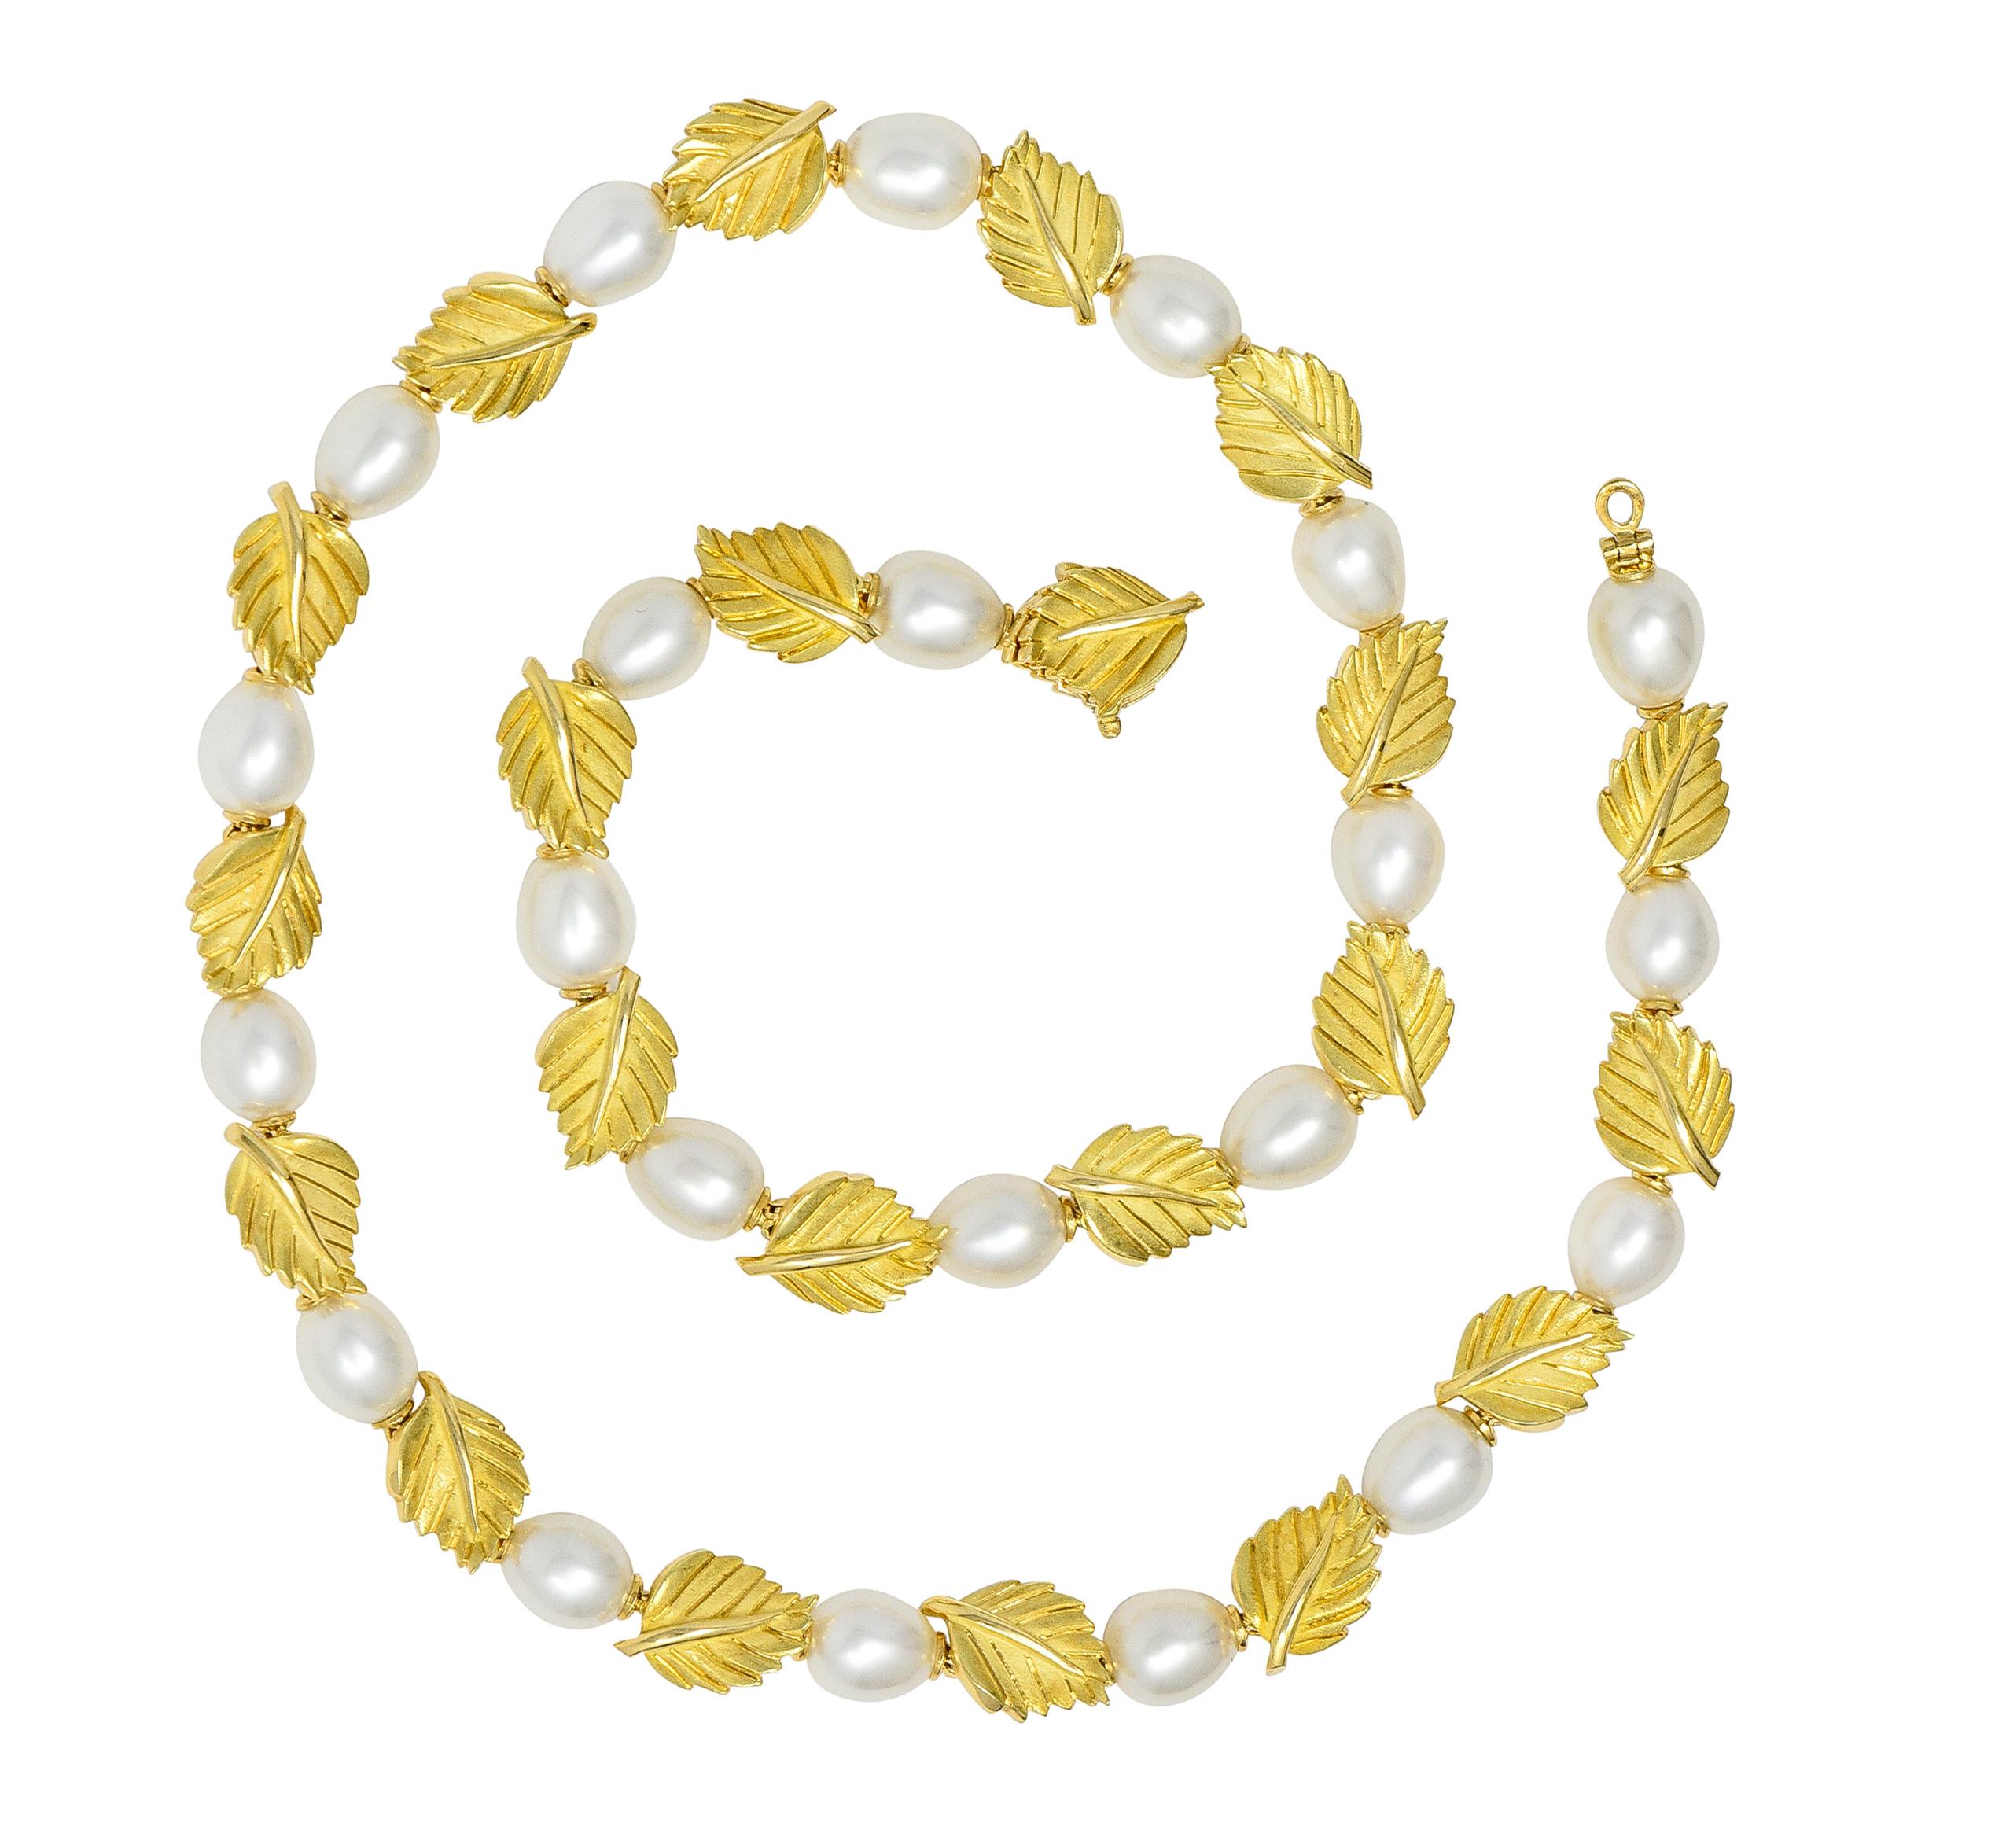 Featuring 7.0 mm near-round cultured pearl beads - white with moderate iridescence. Alternating with hinged gold leaf motif links - matte with engraved veins. Dimensional with furling edges and raised stems. Completed by concealed clasp. Stamped 750